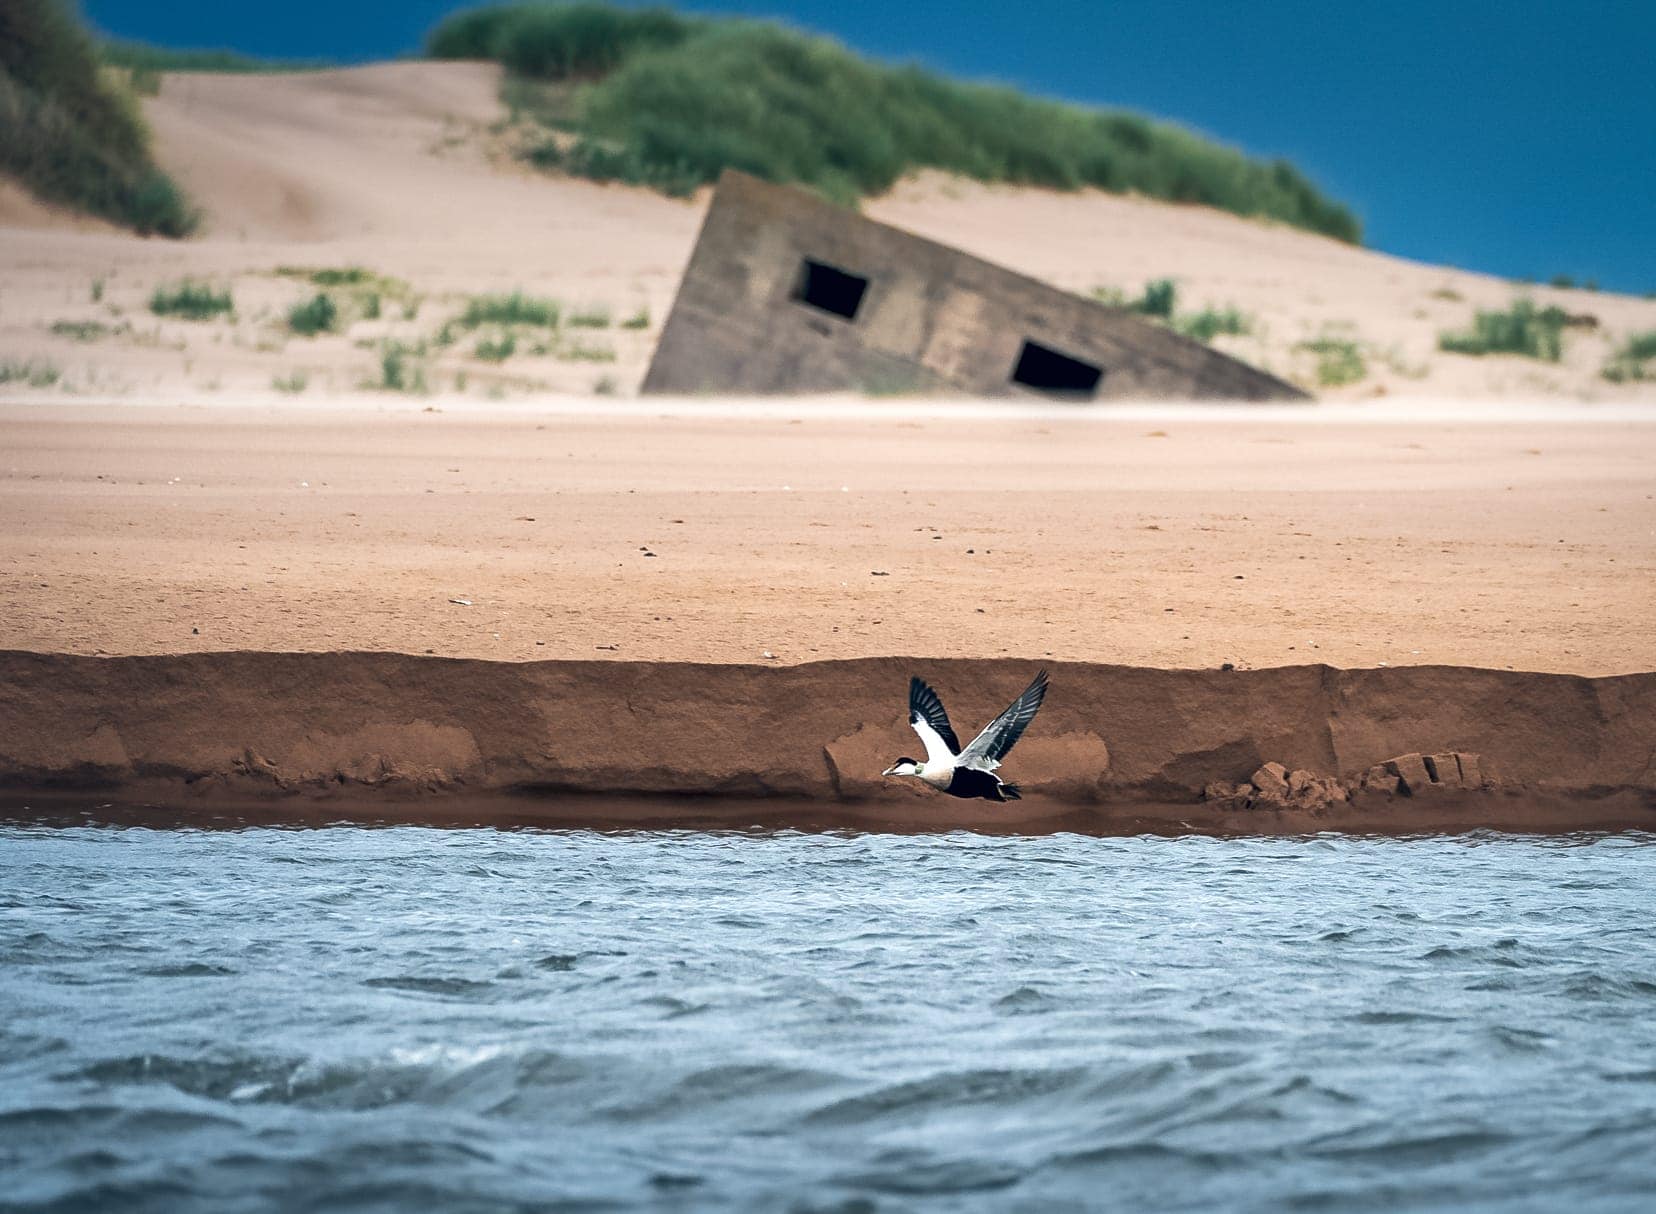 eider duck (black and white) flying across the water and sunken concrete bunker in the back ground on the sand bank